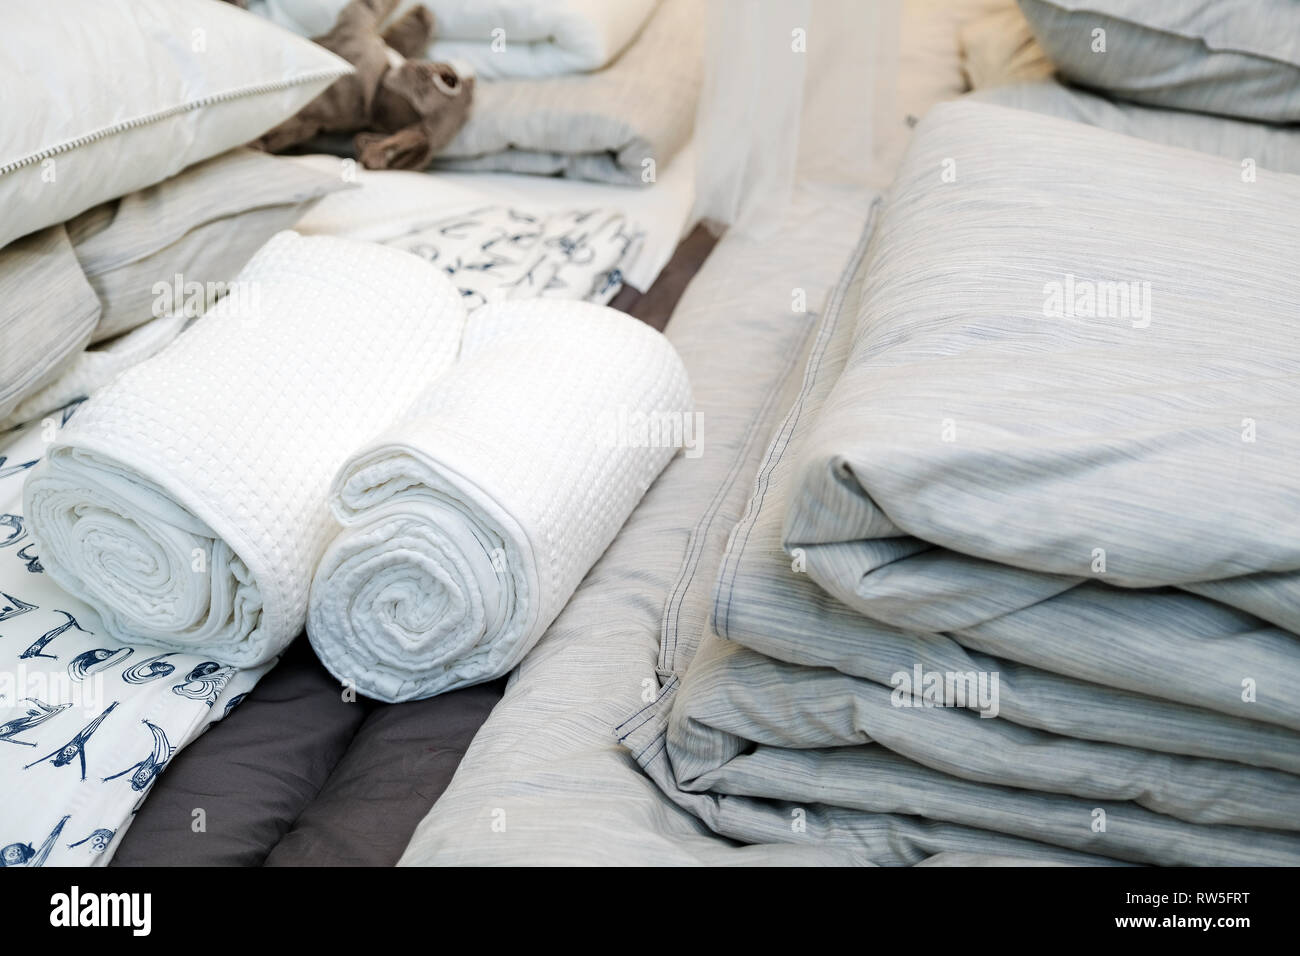 How to Sanitize Clothes, Bed Sheets and Towels